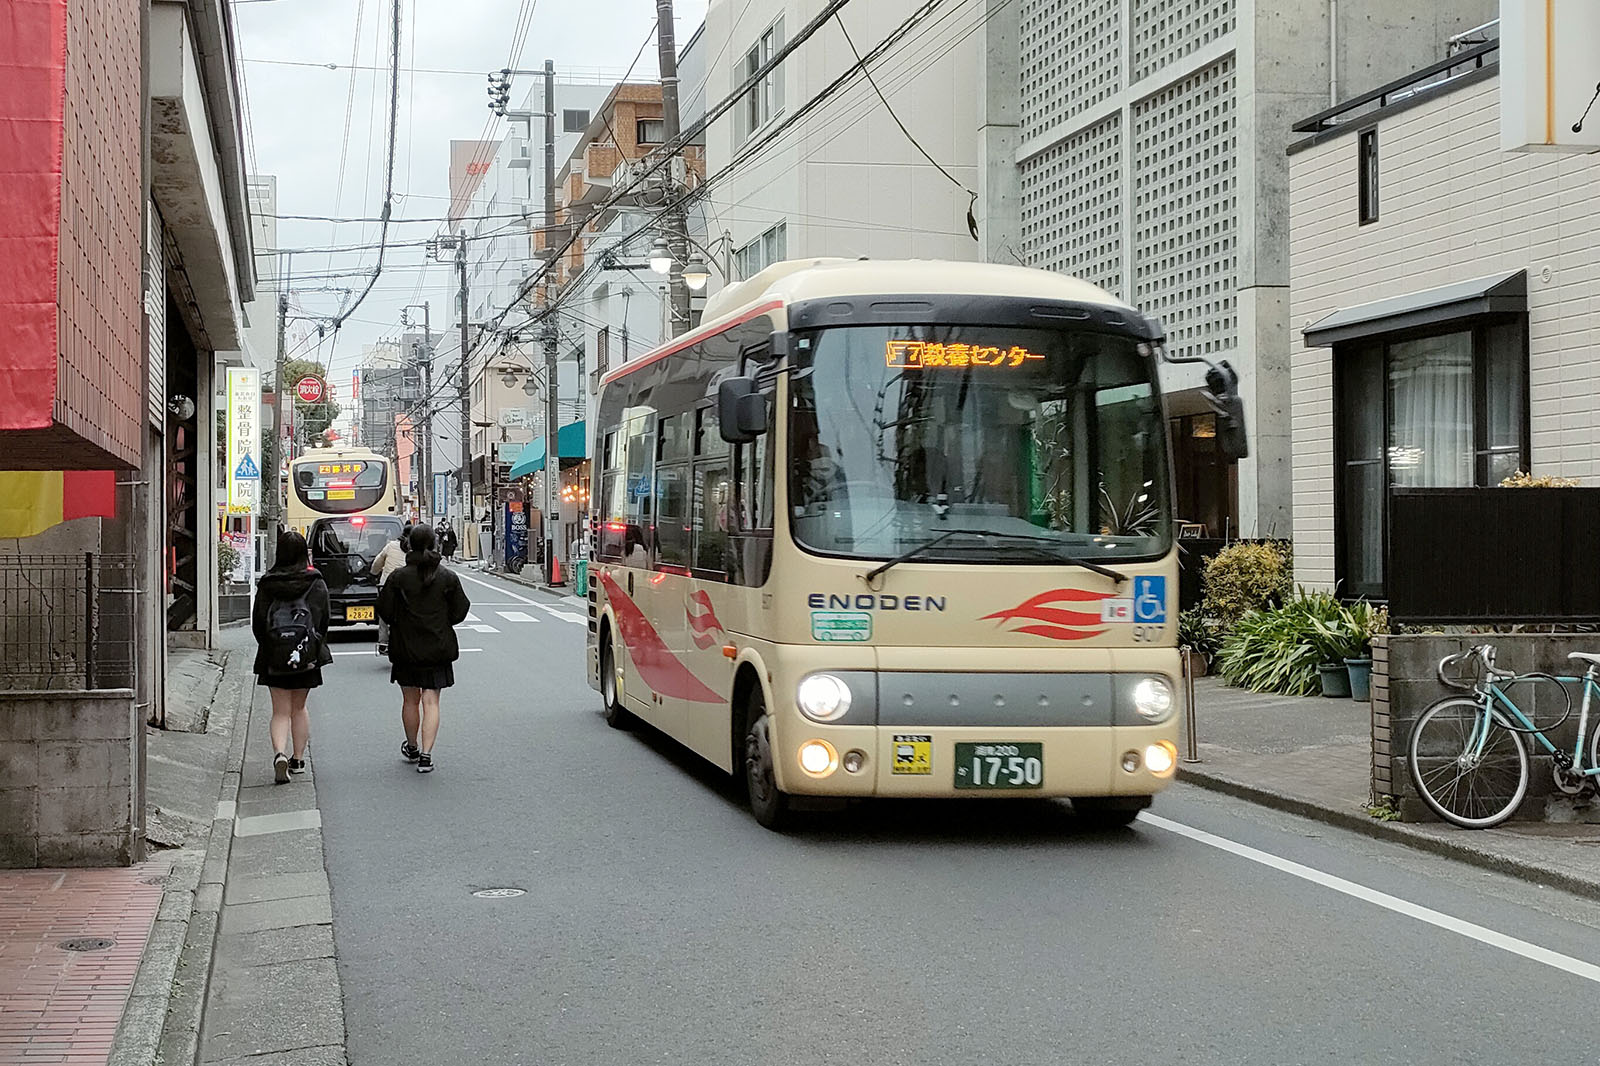 photo: Small bus operated by Enoden Bus